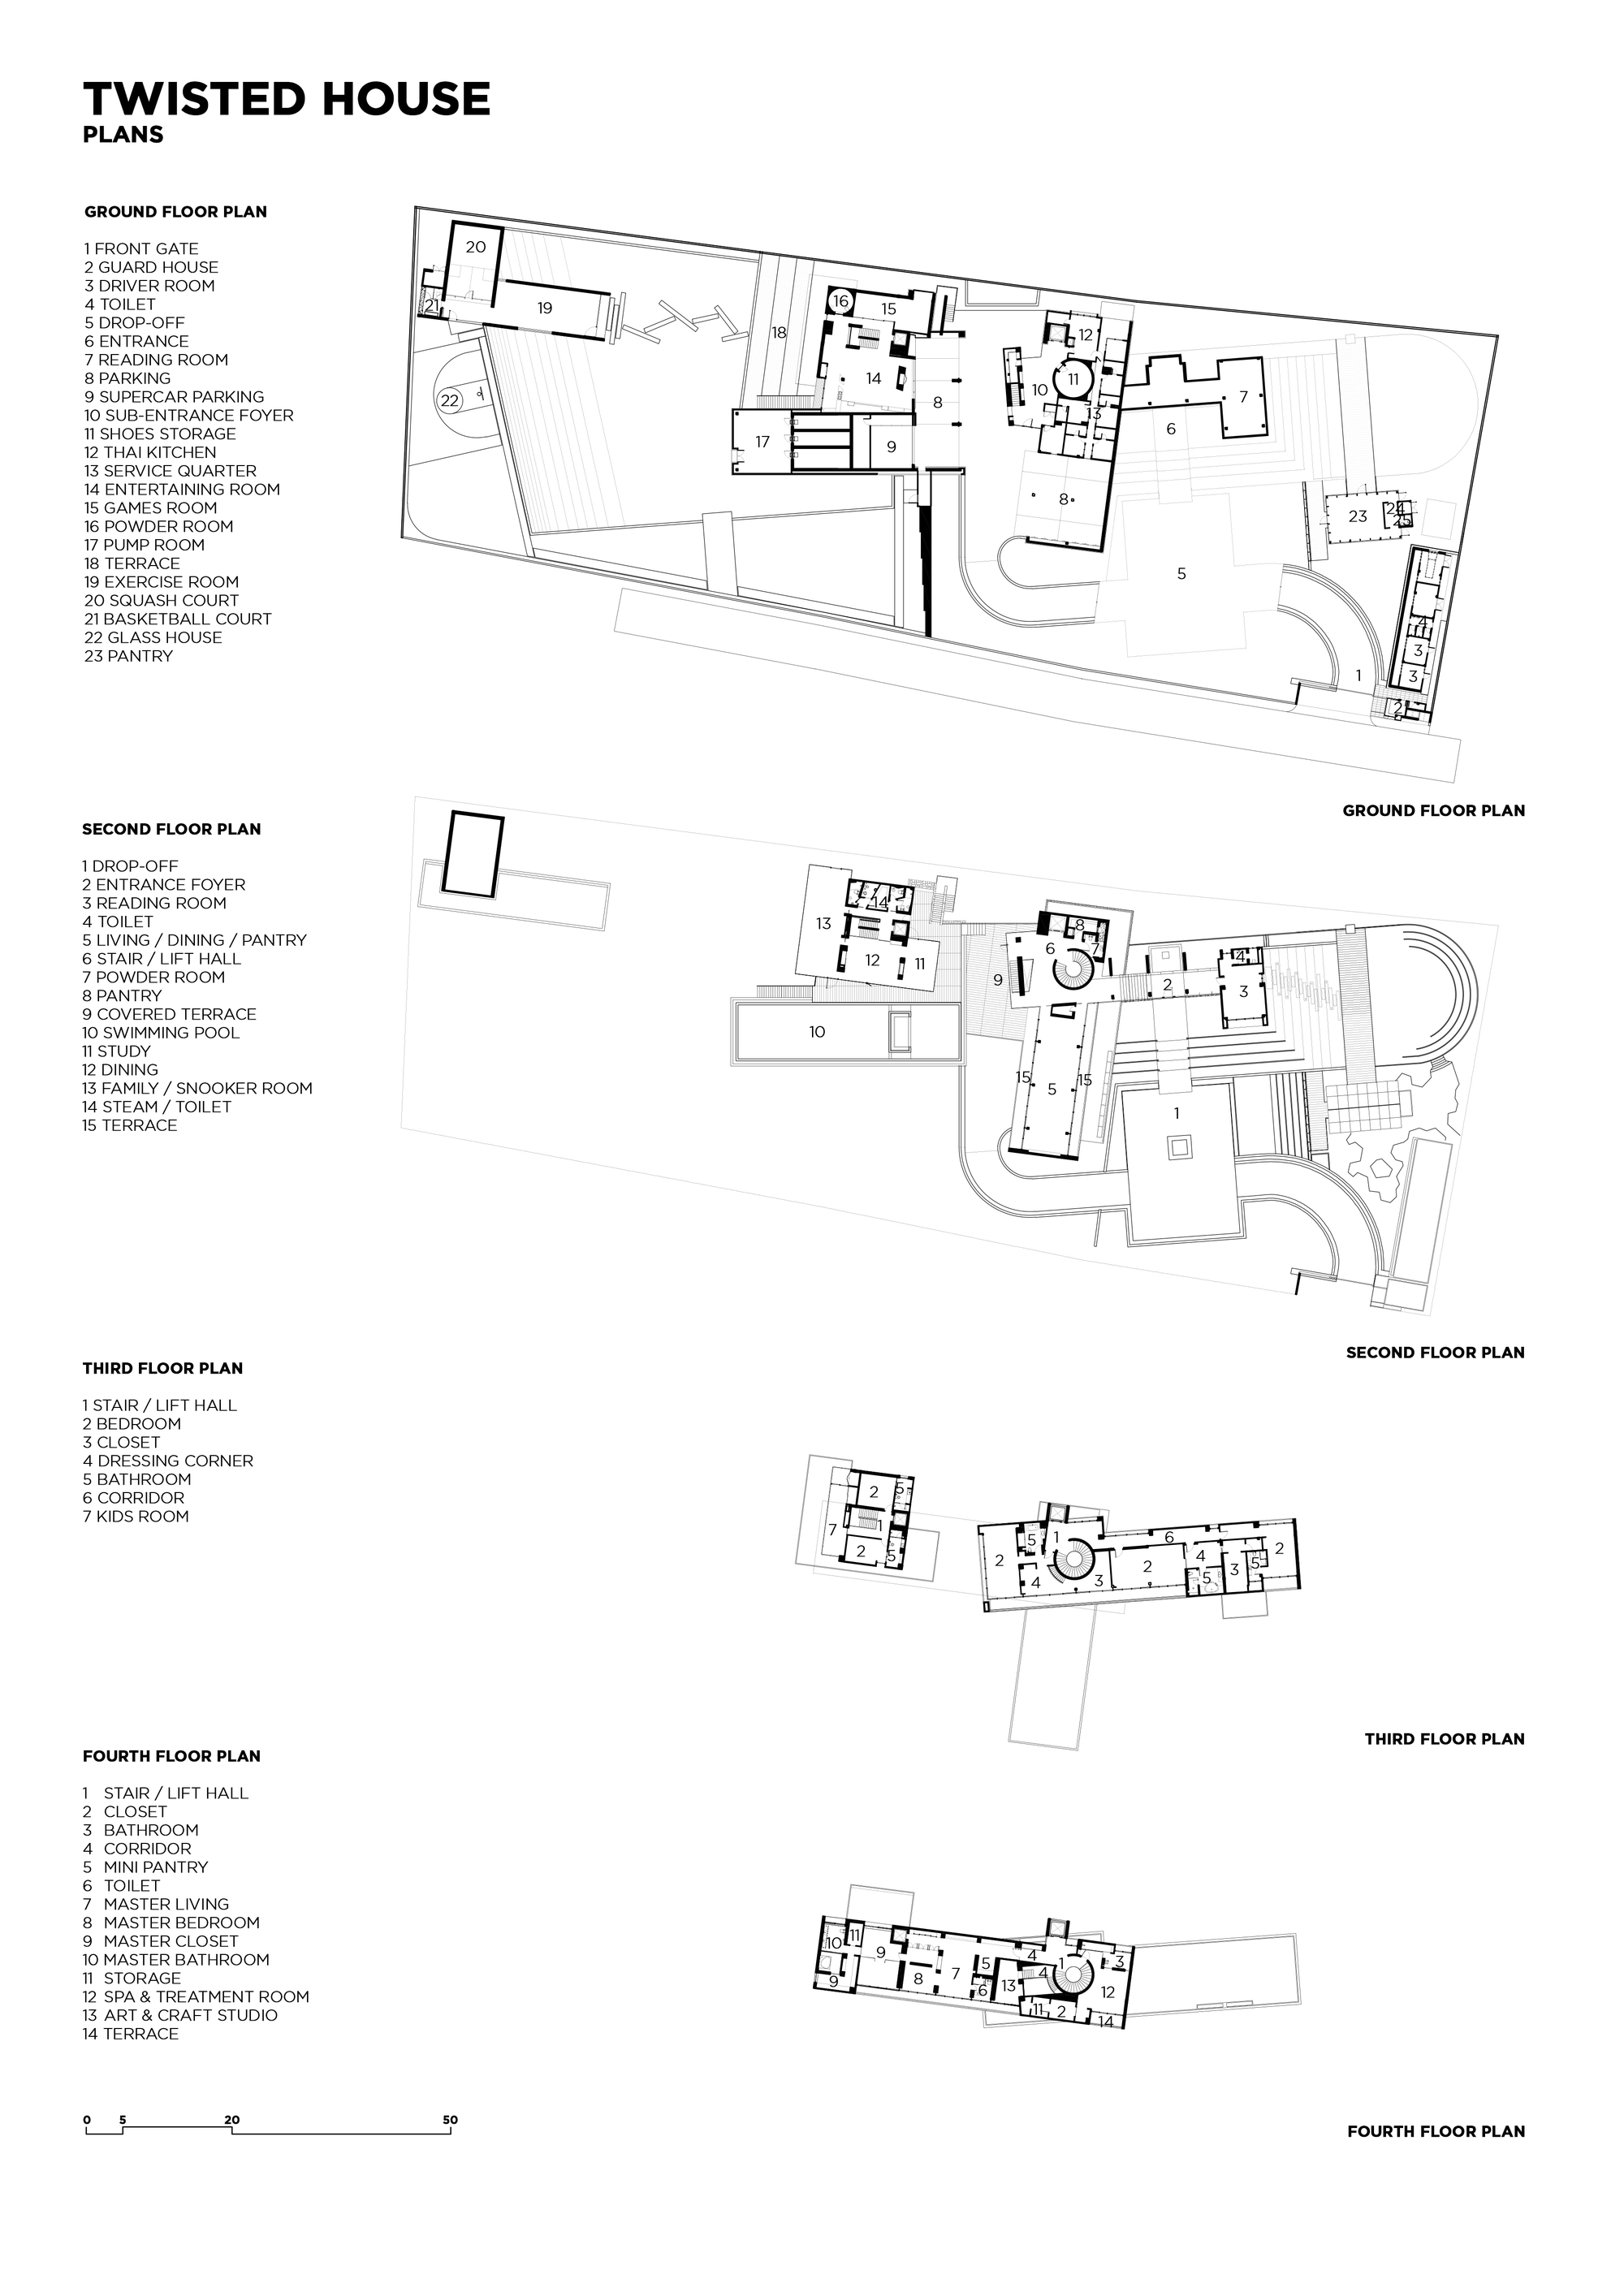 18_Twisted_House___Architects_49_House_Design_Plan.jpg